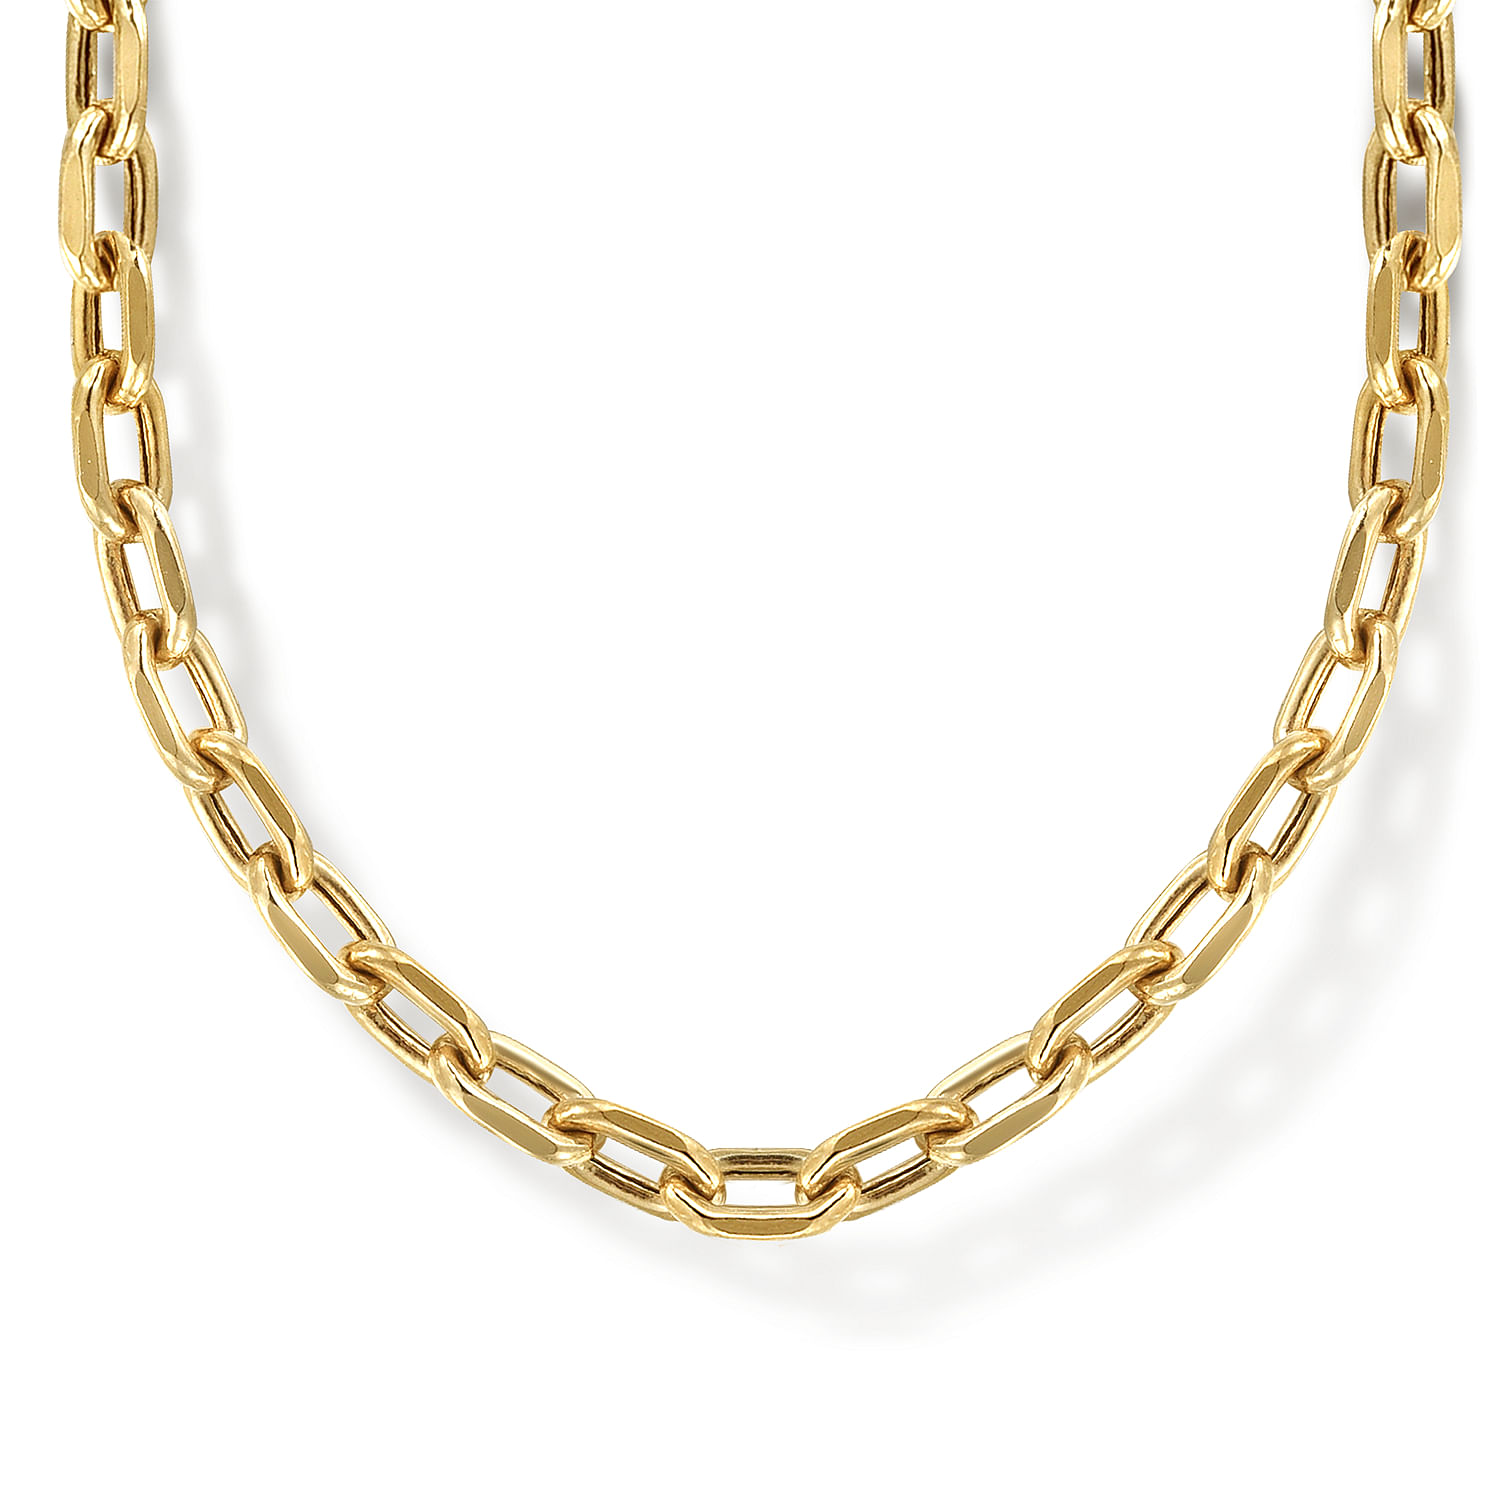 24 Inch 14K Yellow Gold Hollow Chain Necklace